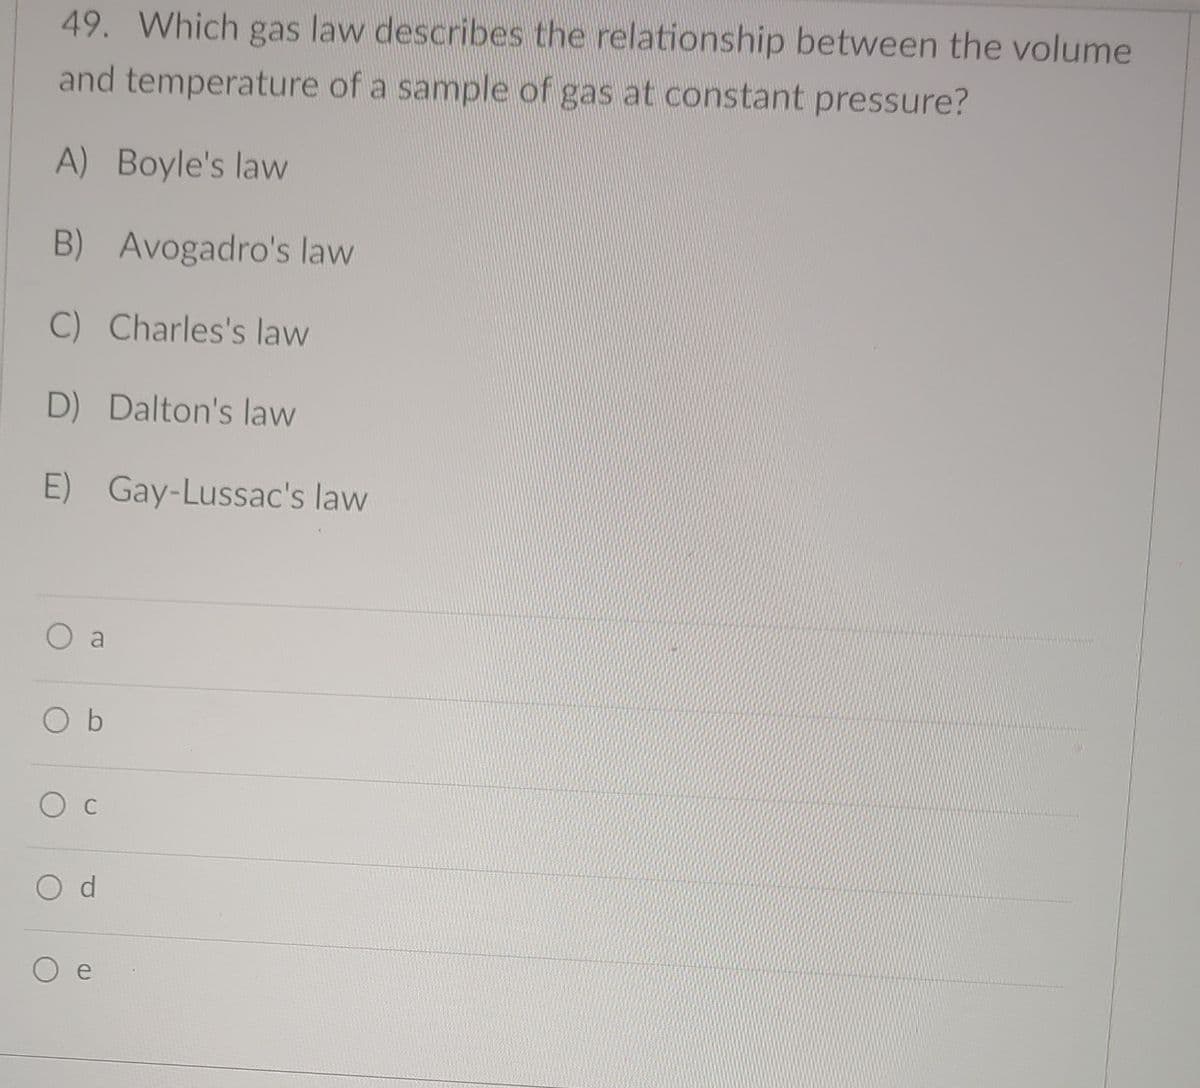 49. Which gas law describes the relationship between the volume
and temperature of a sample of gas at constant pressure?
A) Boyle's law
B) Avogadro's law
C) Charles's law
D) Dalton's law
E) Gay-Lussac's law
O b
O c
O d
e
